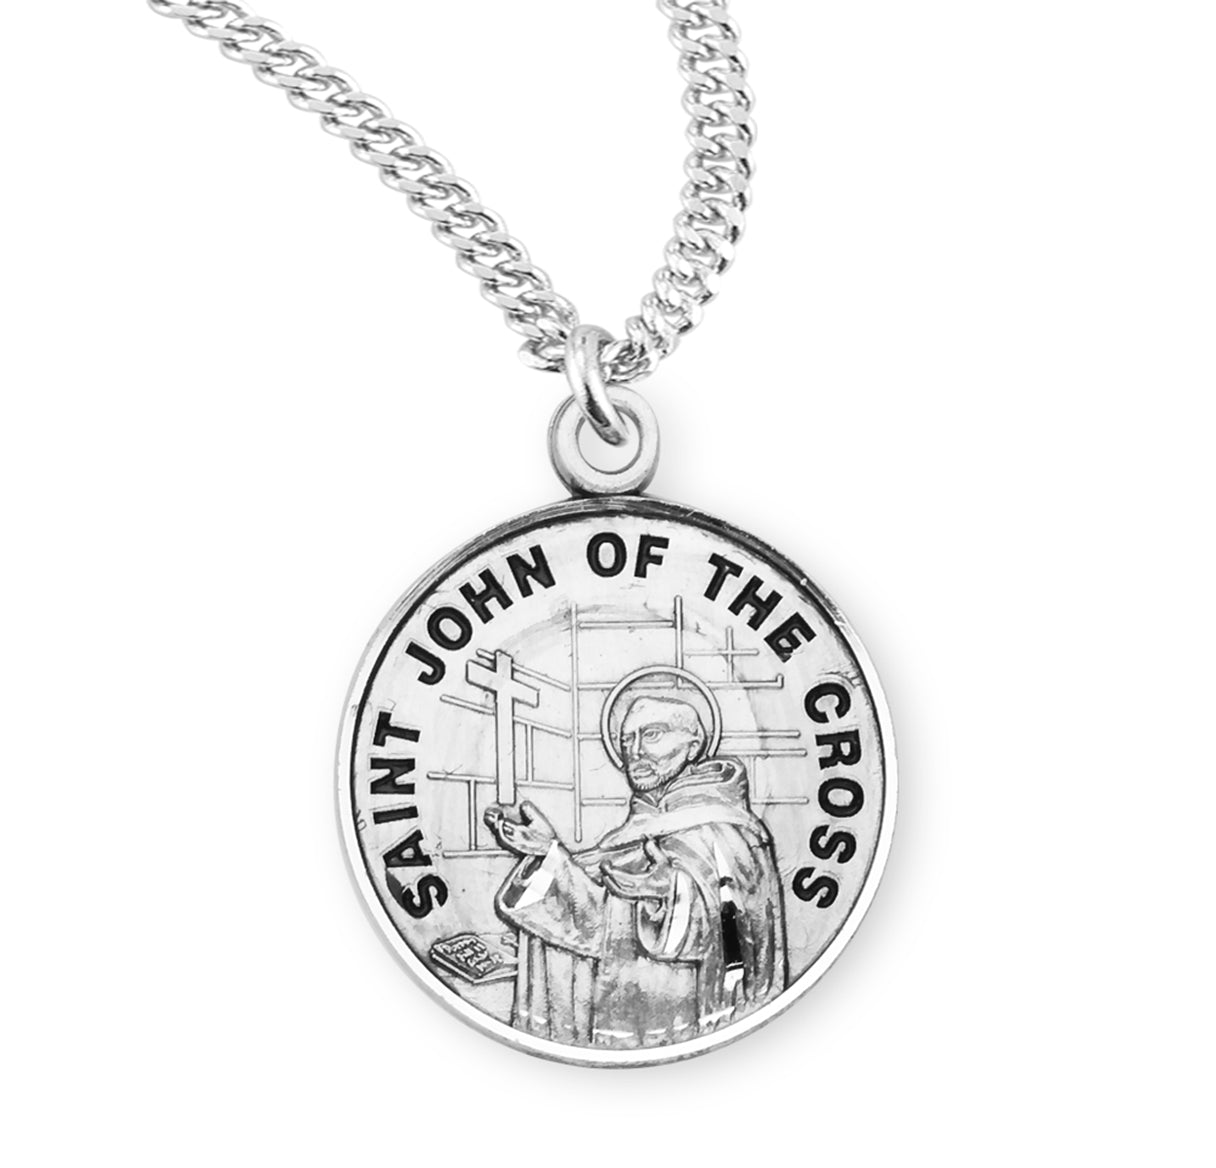 Patron Saint John of the Cross Round Sterling Silver Medal